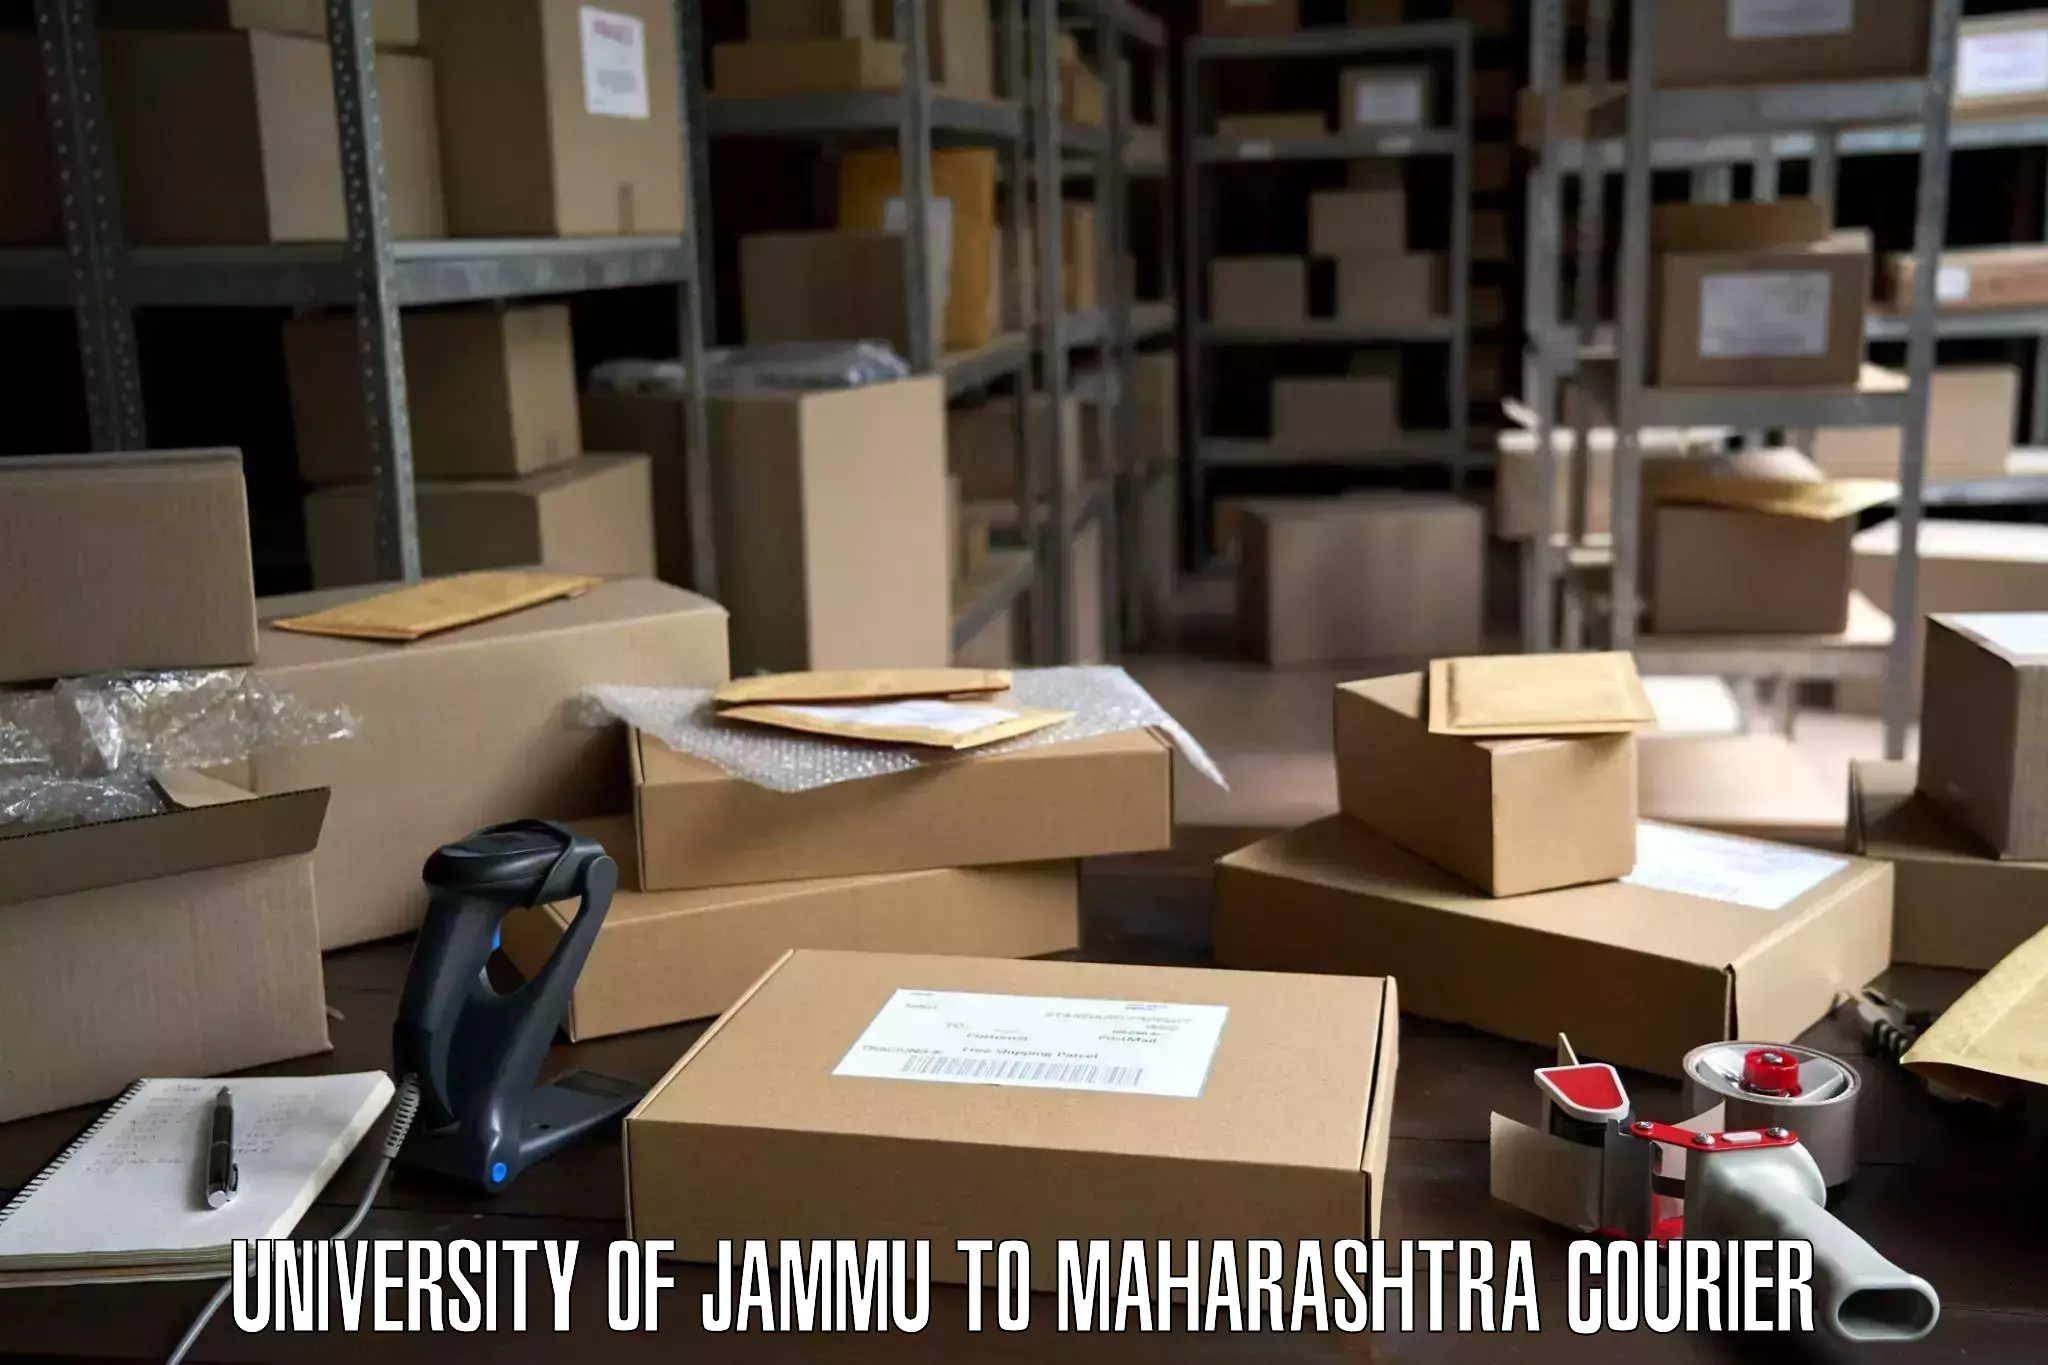 Furniture moving specialists University of Jammu to Tasgaon